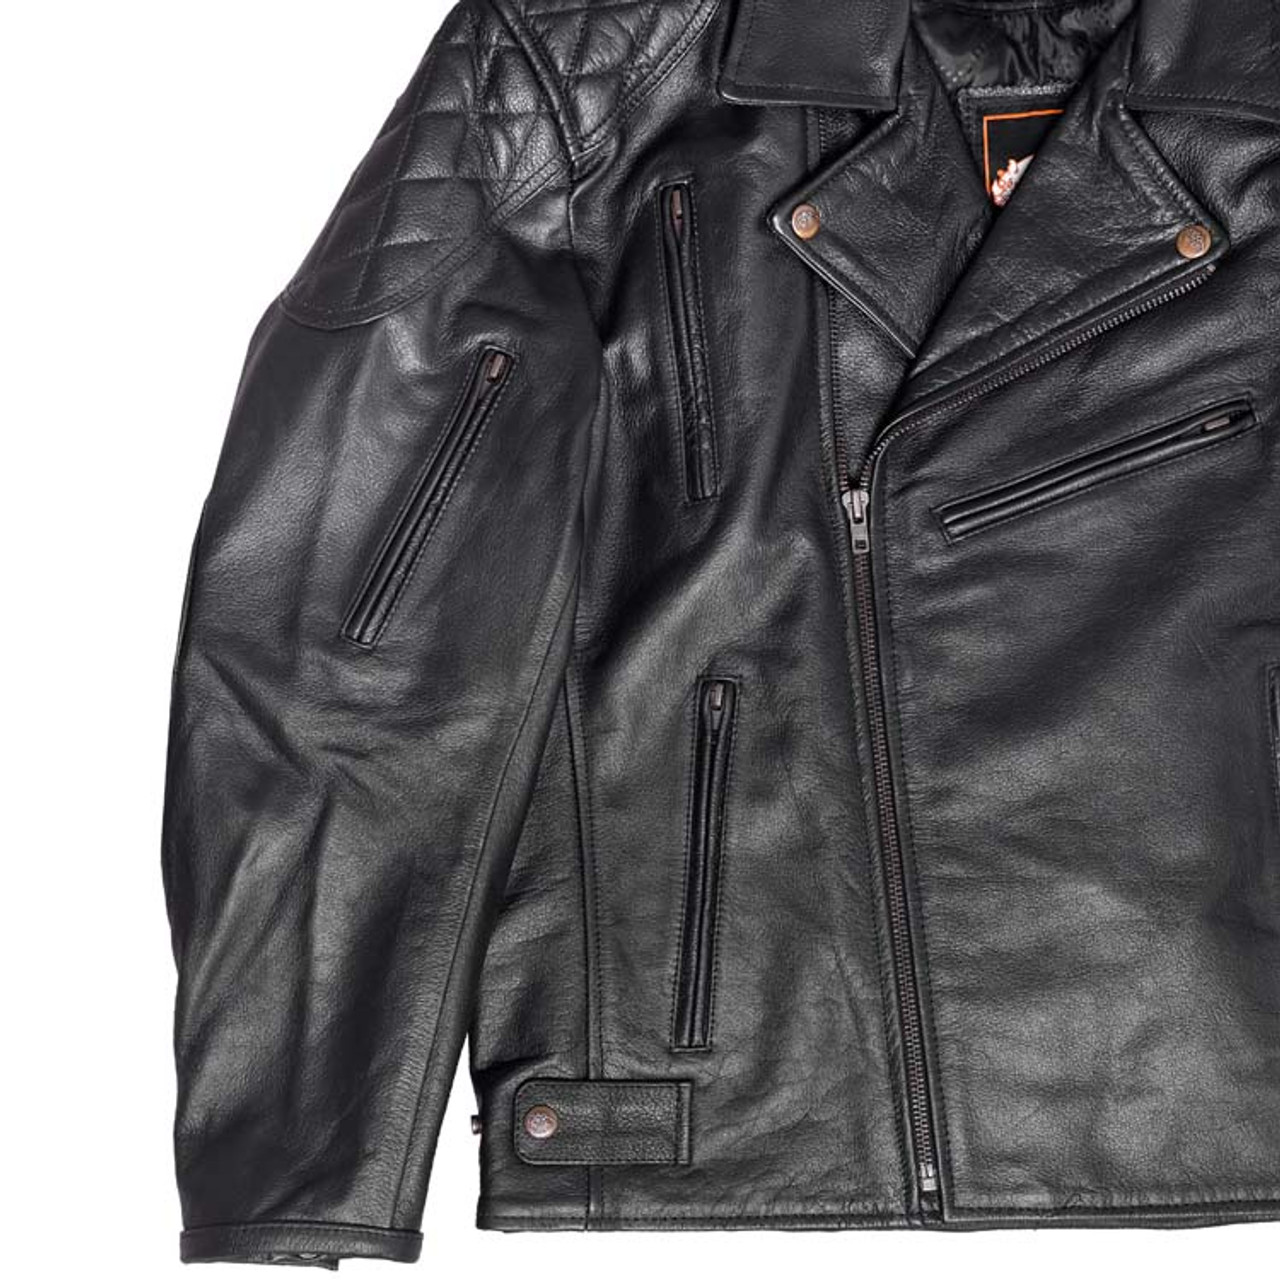 Black Brando Leather Motorcycle Jacket with Armour & Vents